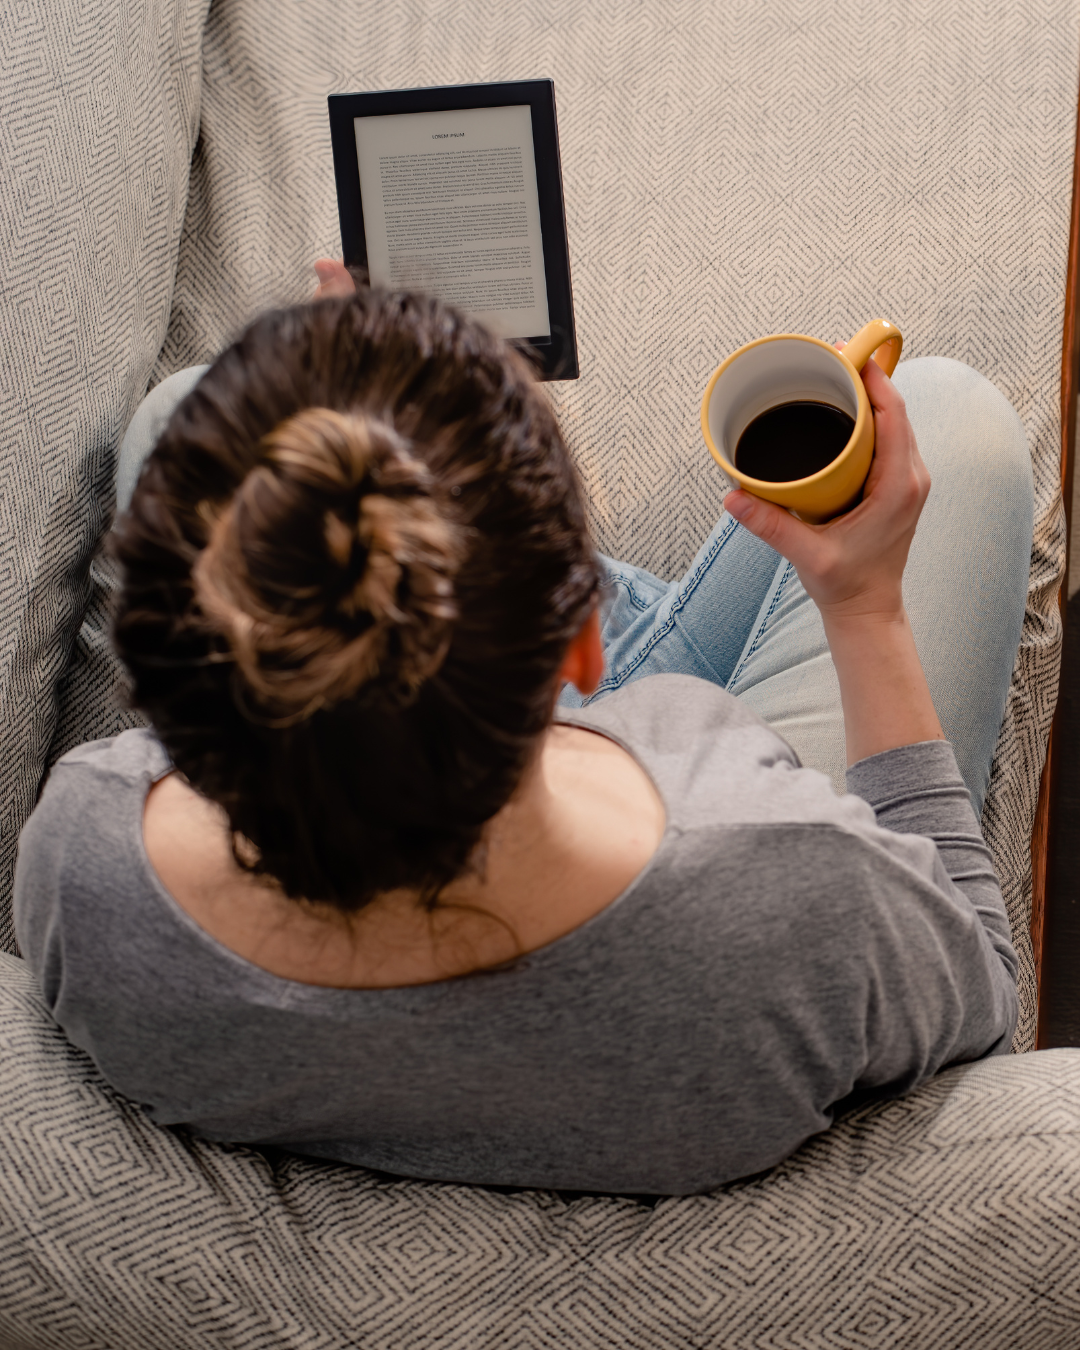 a person sitting on a couch holding a coffee cup and a tablet